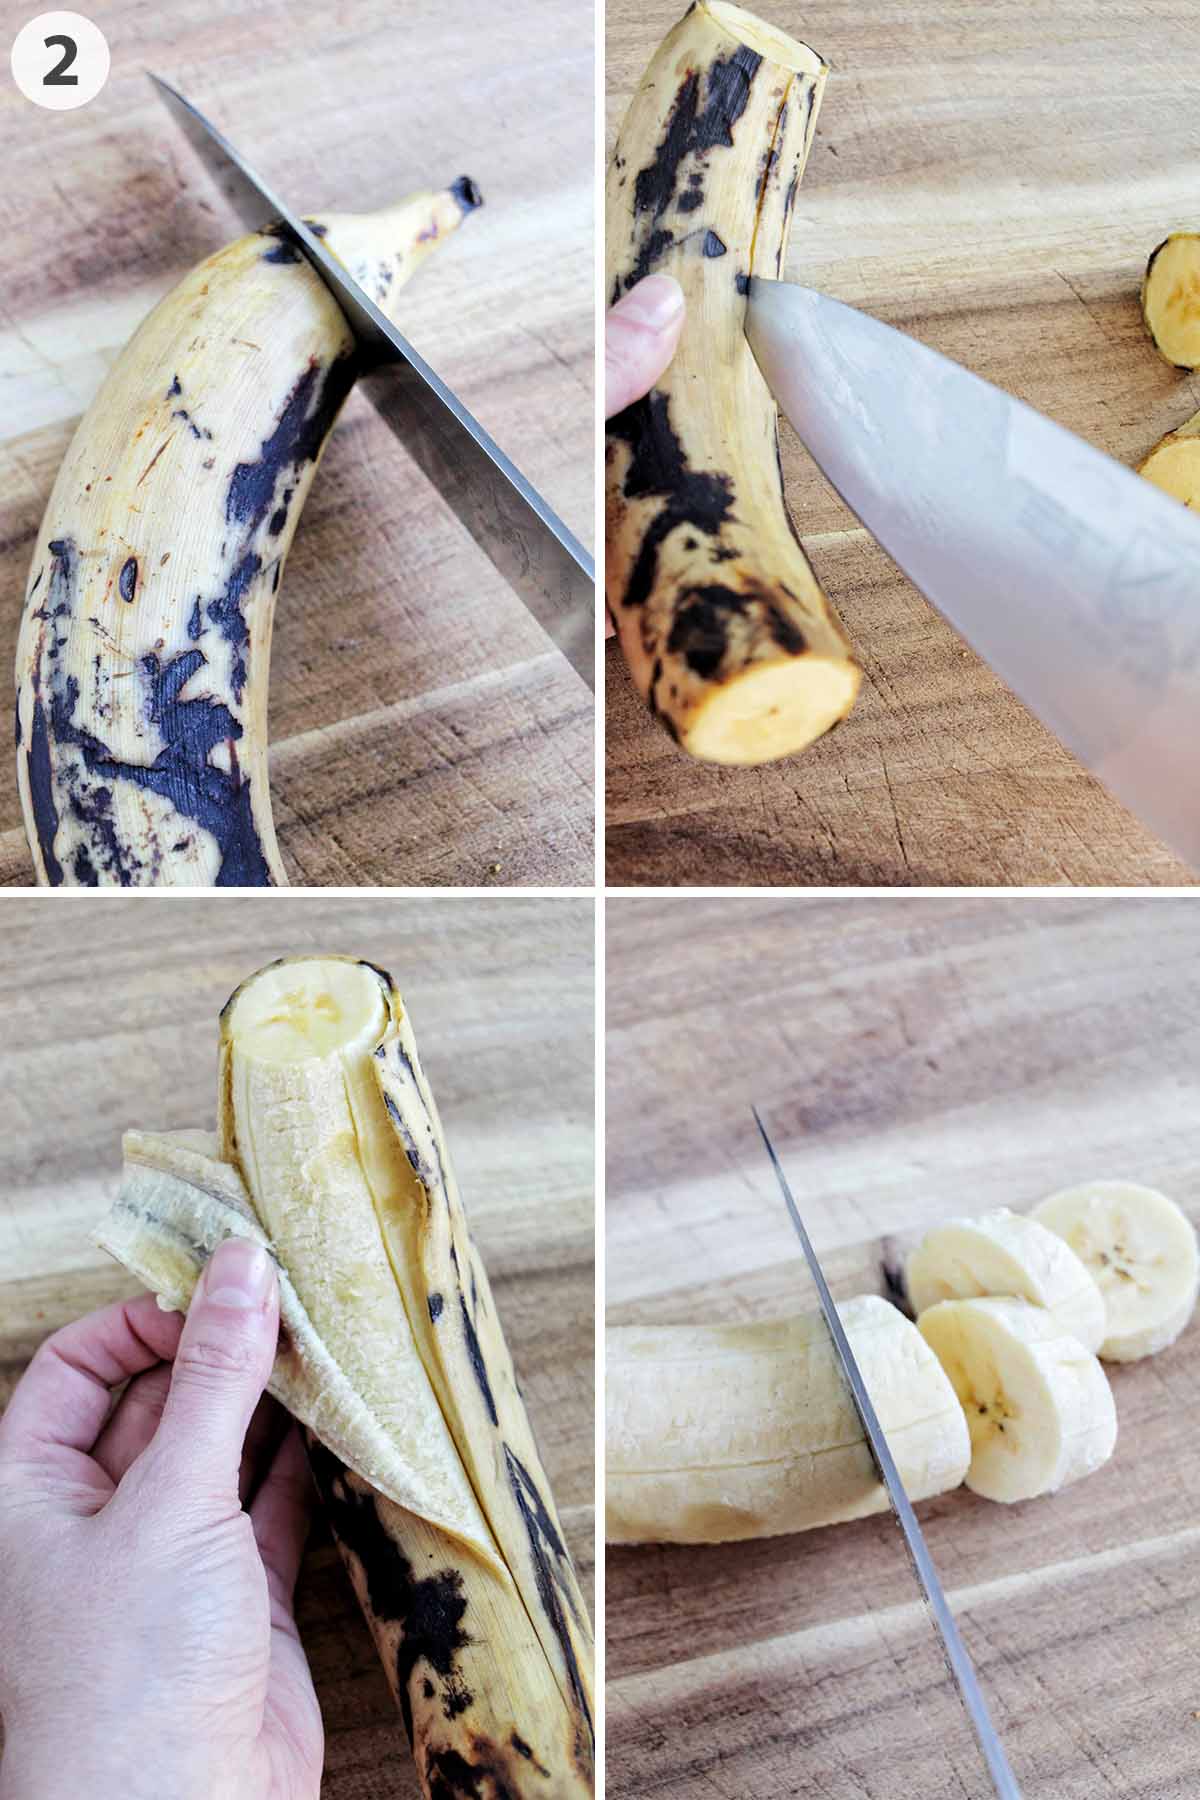 numbered photo showing how to cut a plantain.